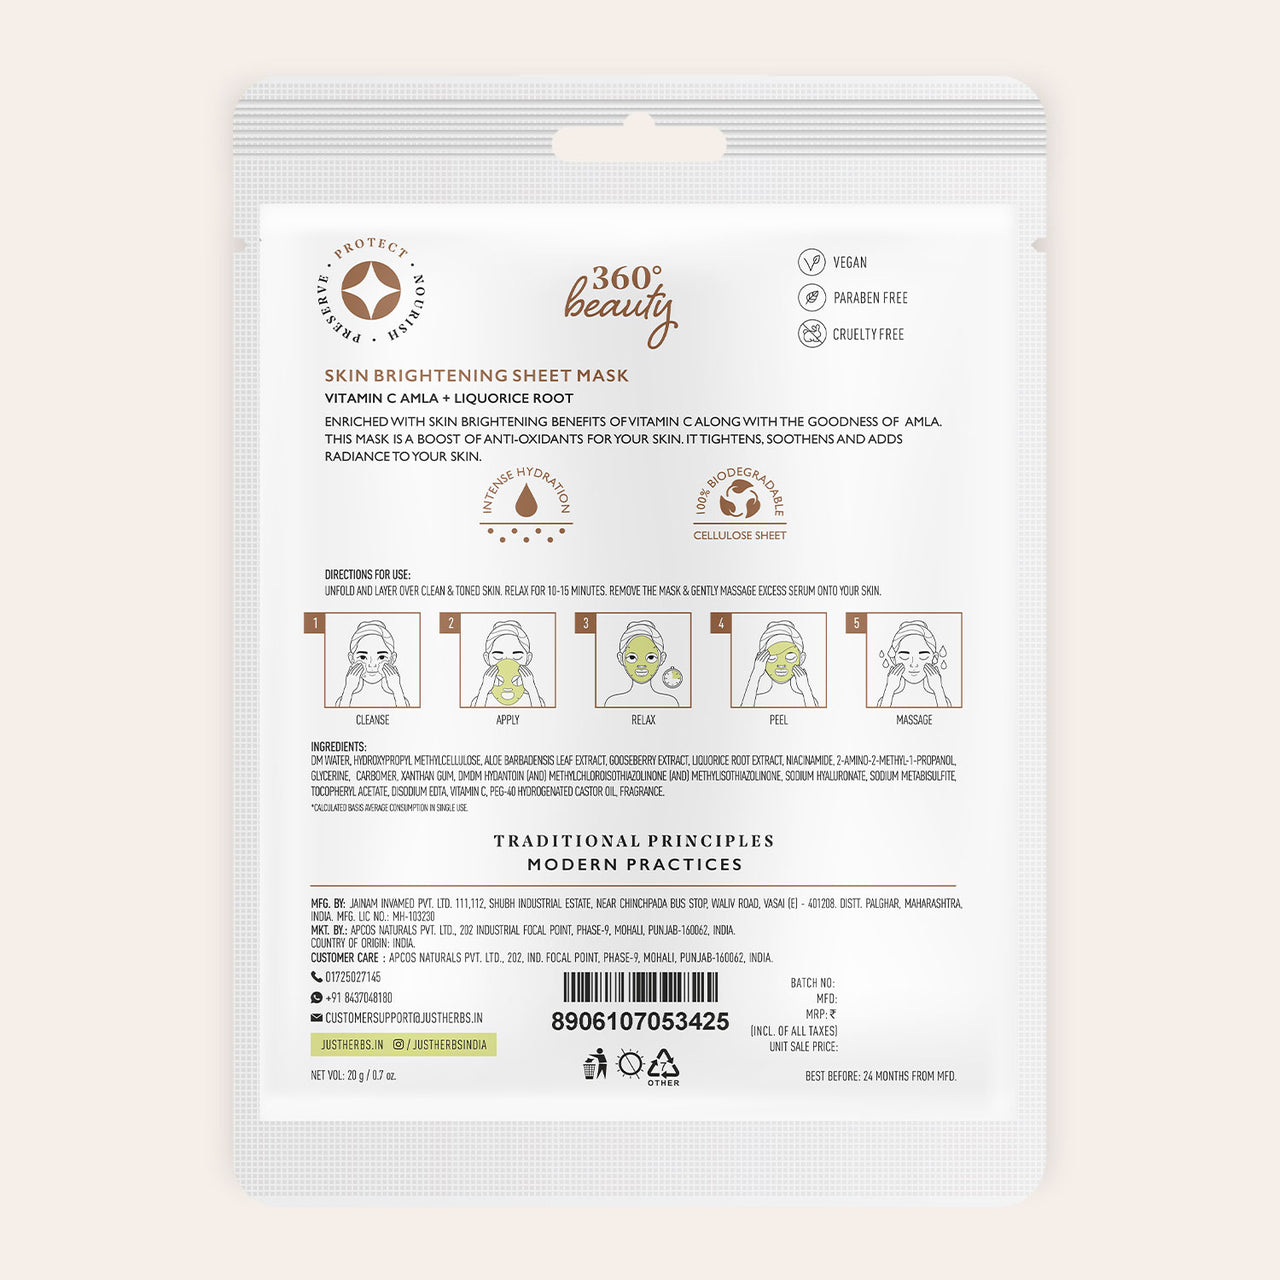 Vitamin C Amla Sheet Mask with Liquorice Root for Skin Brightening - Pack of 1